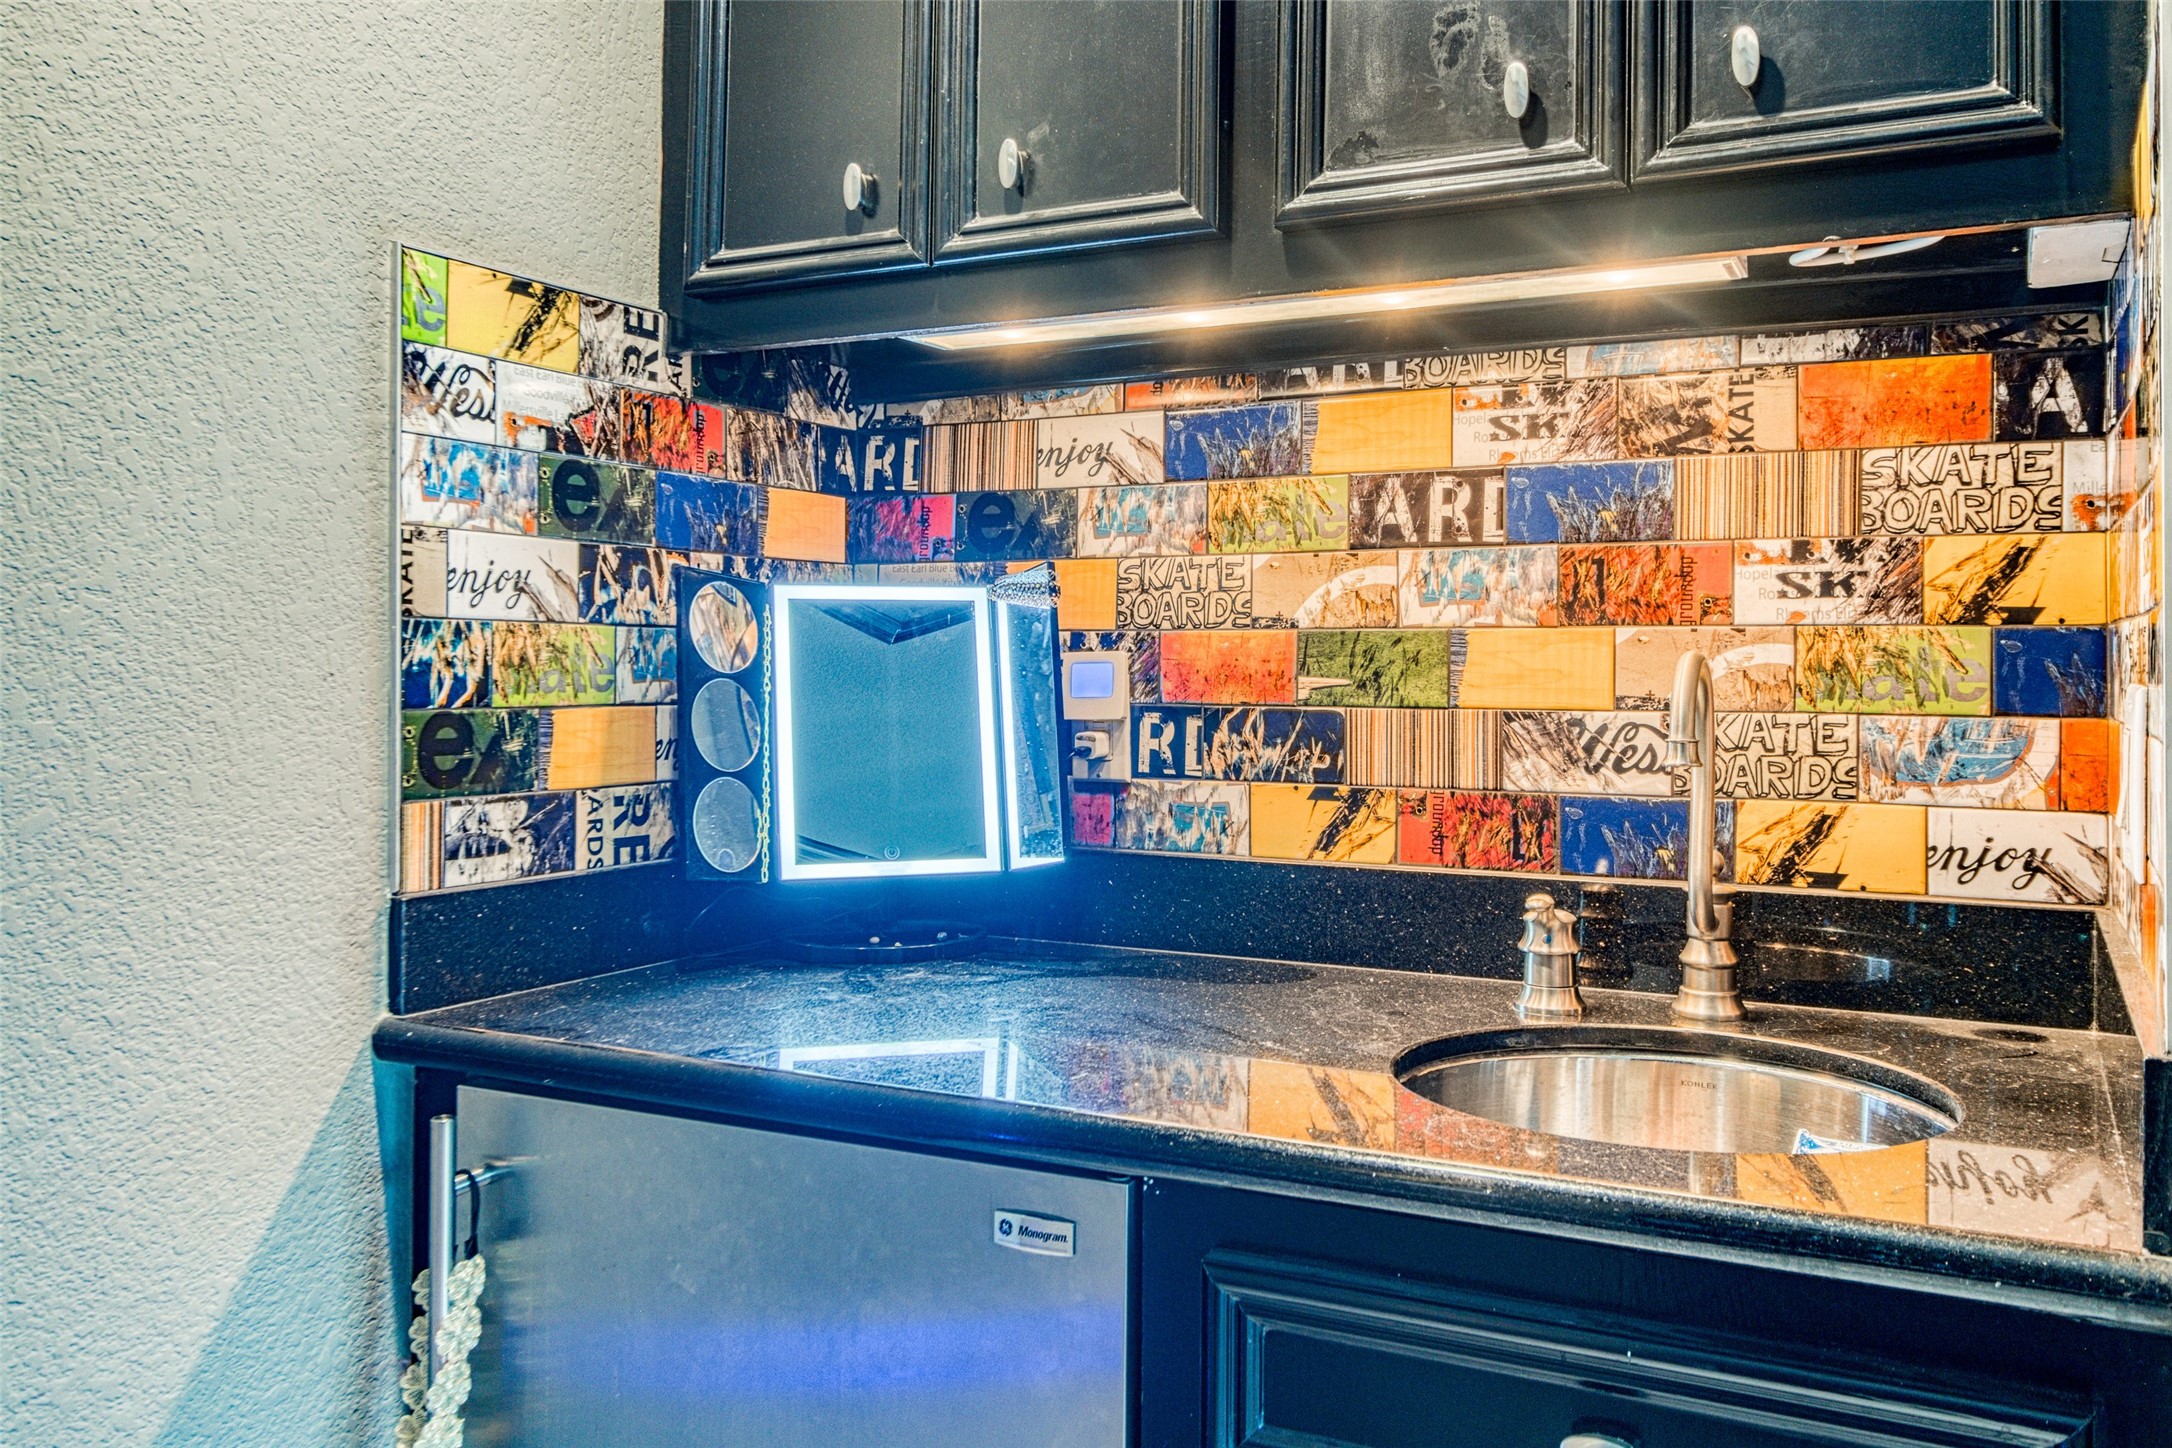 The full wet bar on the fourth floor features custom tile backsplash with graffiti artwork by a noted local artist contrasting beautifully with the granite countertops, beverage cooler, cocktail sink, and plenty of storage for easy entertaining.